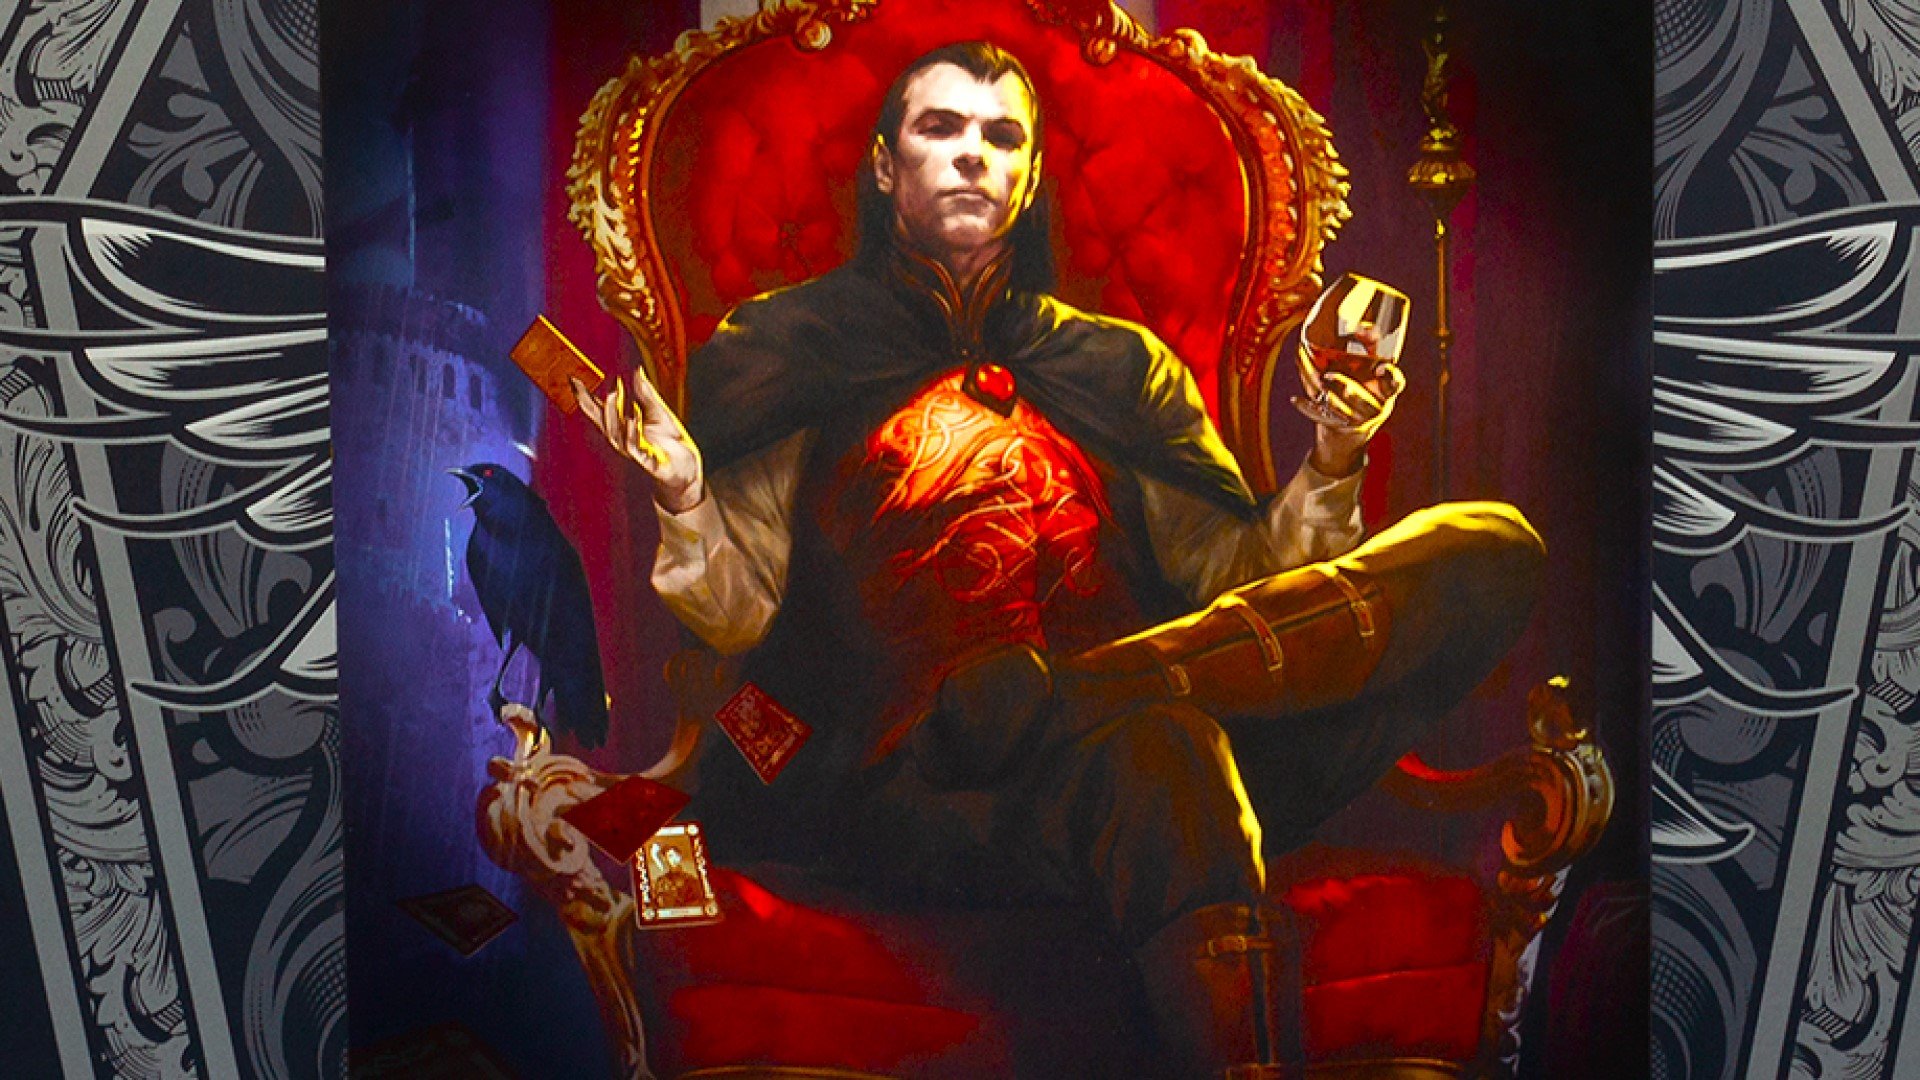 DnD how to be a DM - Wizards of the Coast's Curse of Strahd cover, showing the vampire Strahd sat in a red armchair